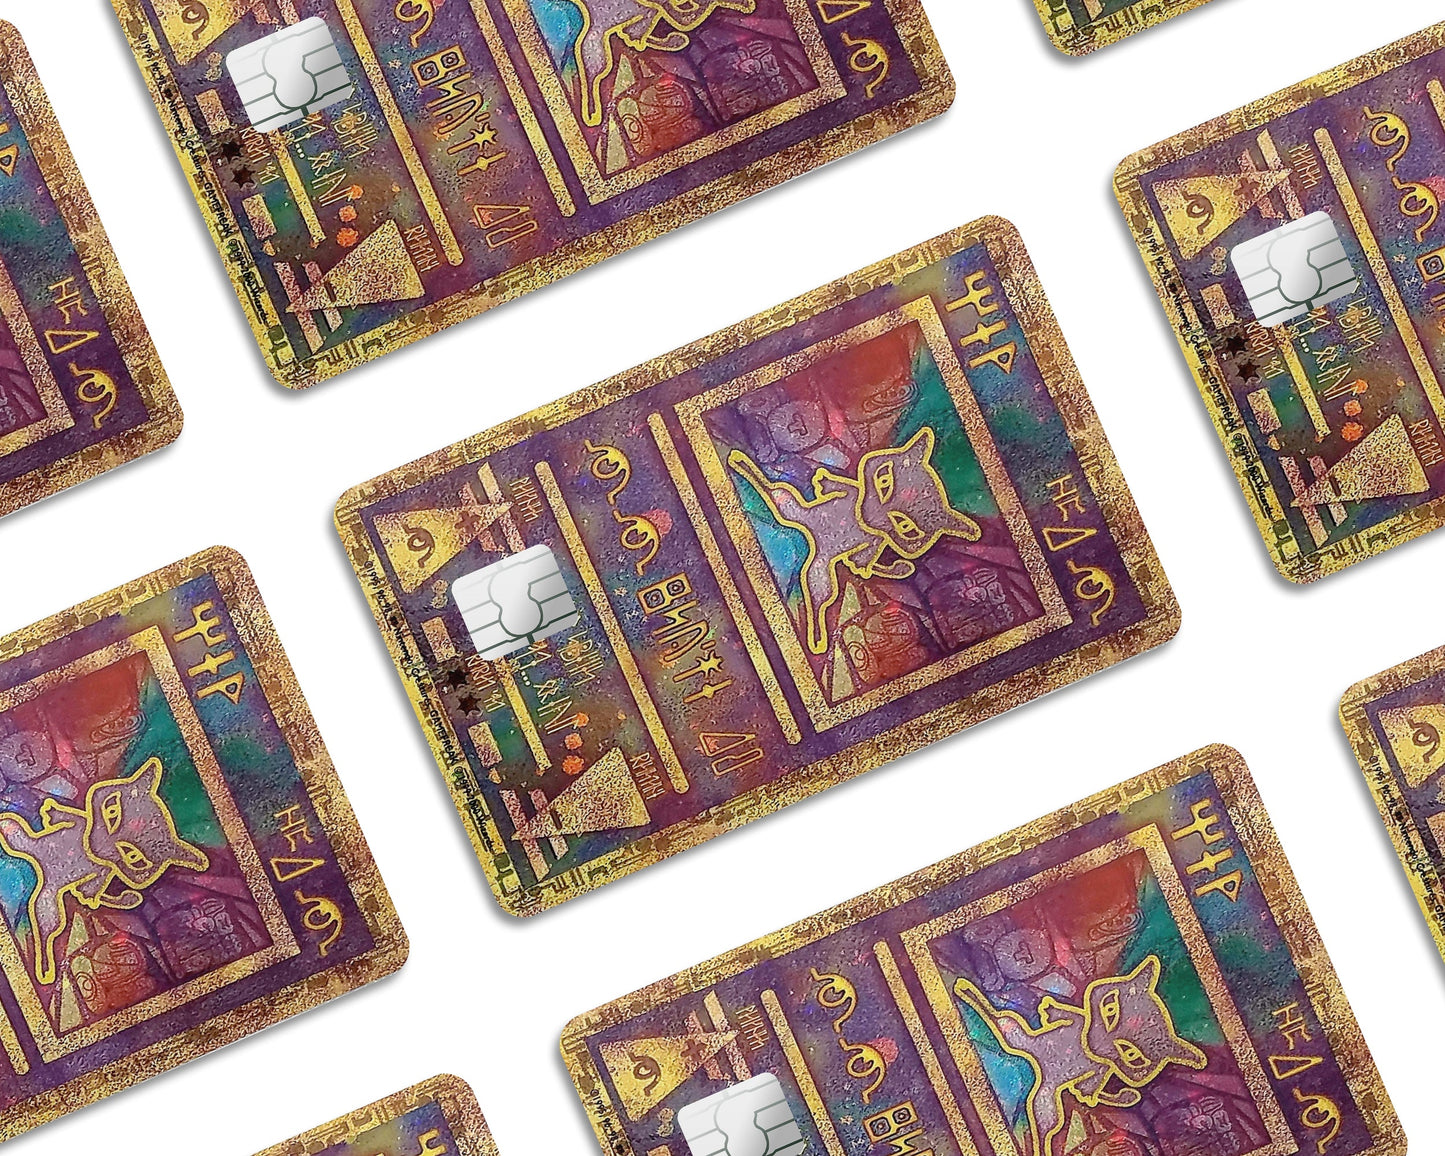 Anime Town Creations Credit Card Ancient Mew Pokemon Card Half Skins - Anime Pokemon Credit Card Skin